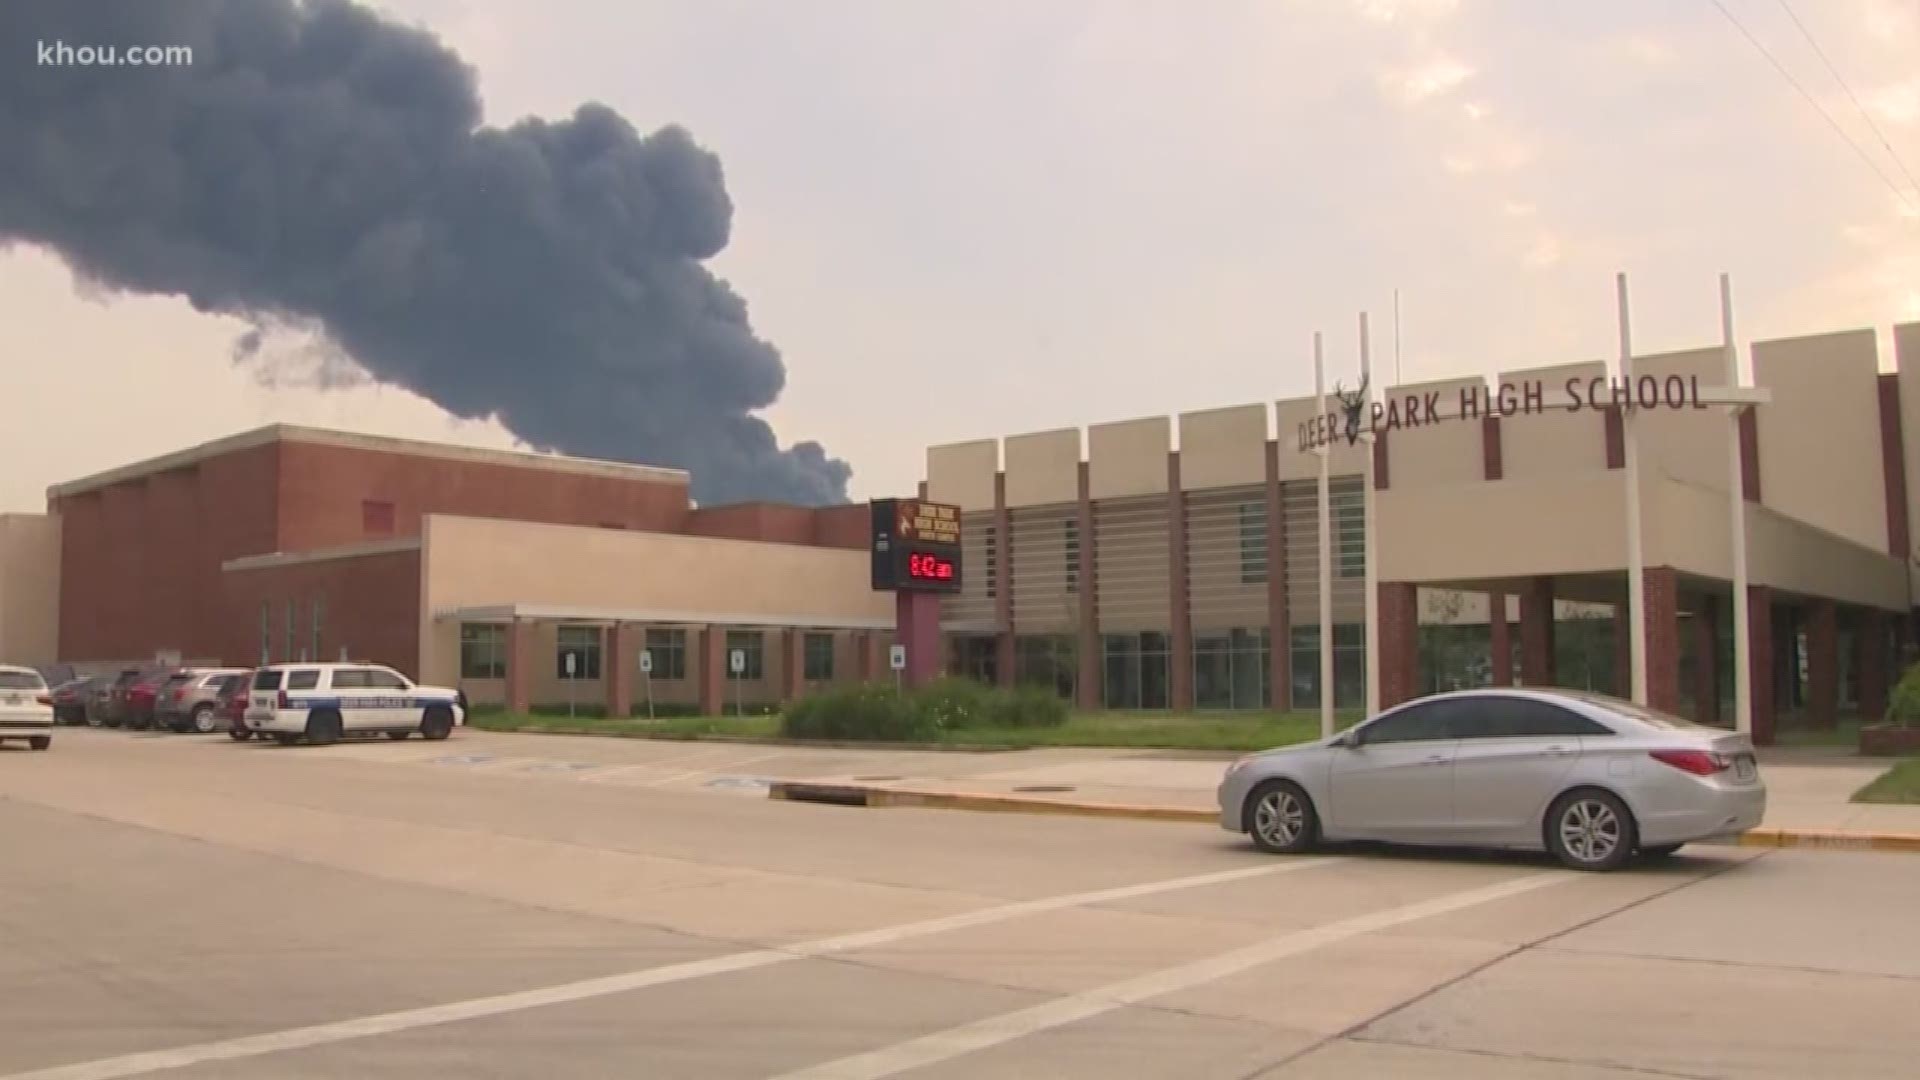 Students in school districts near the ITC chemical facility are returning to class on Monday after the tank fire that prompted school closures last week.